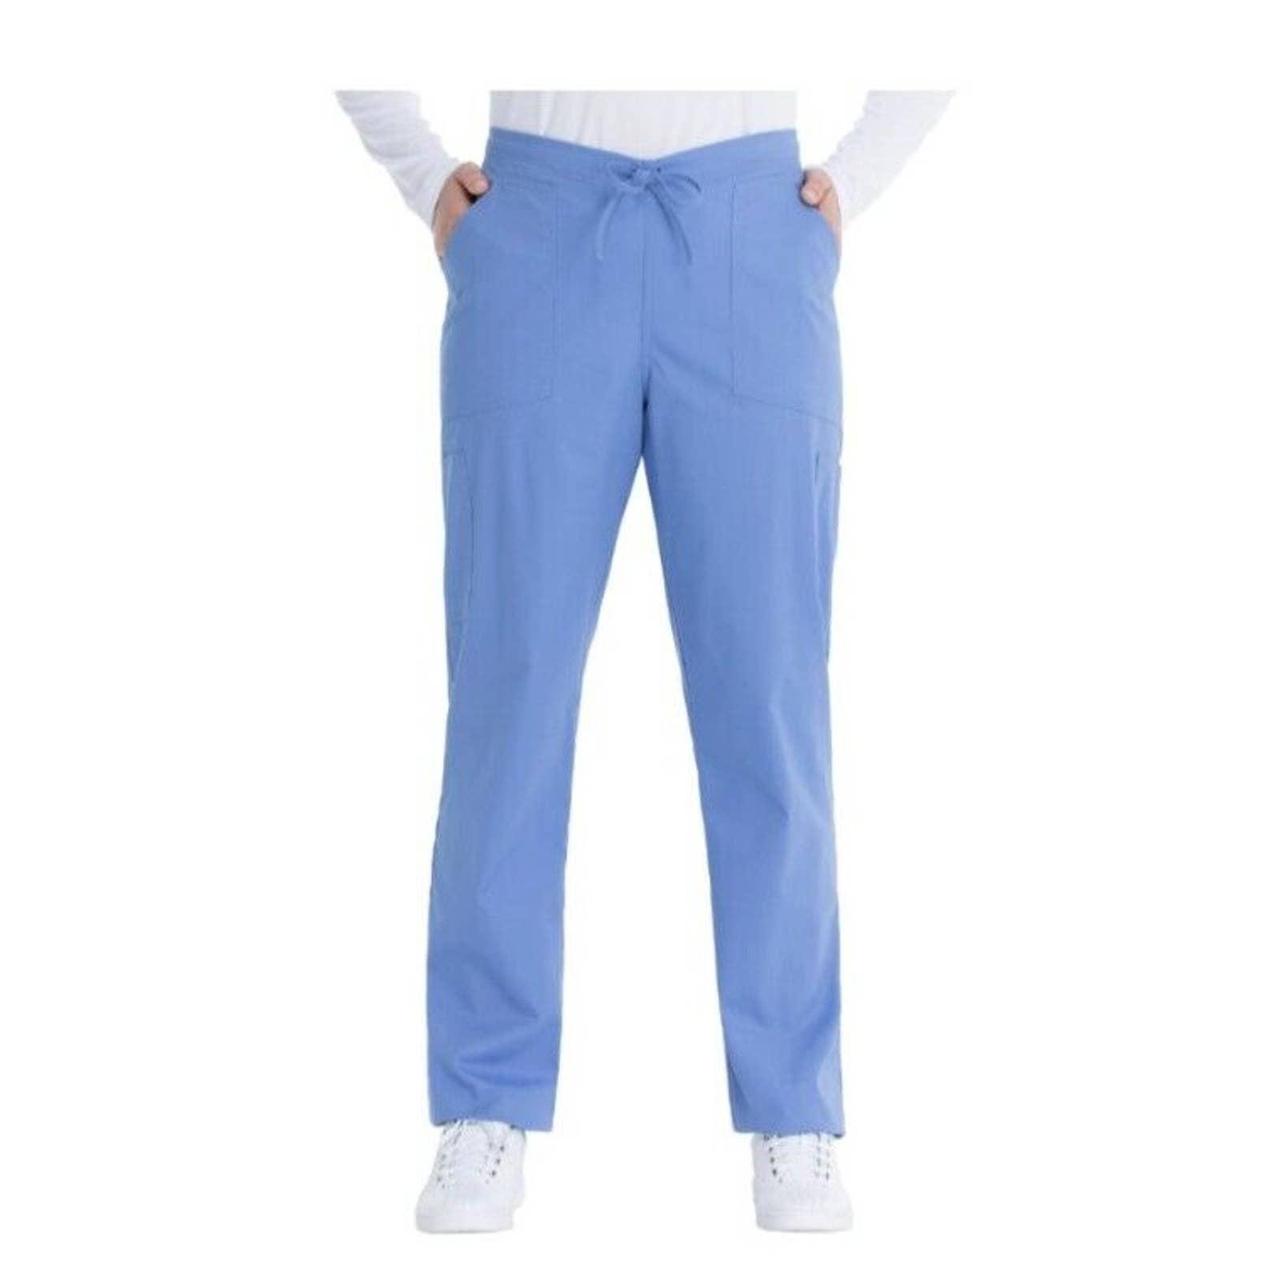 Women's medical trousers, 